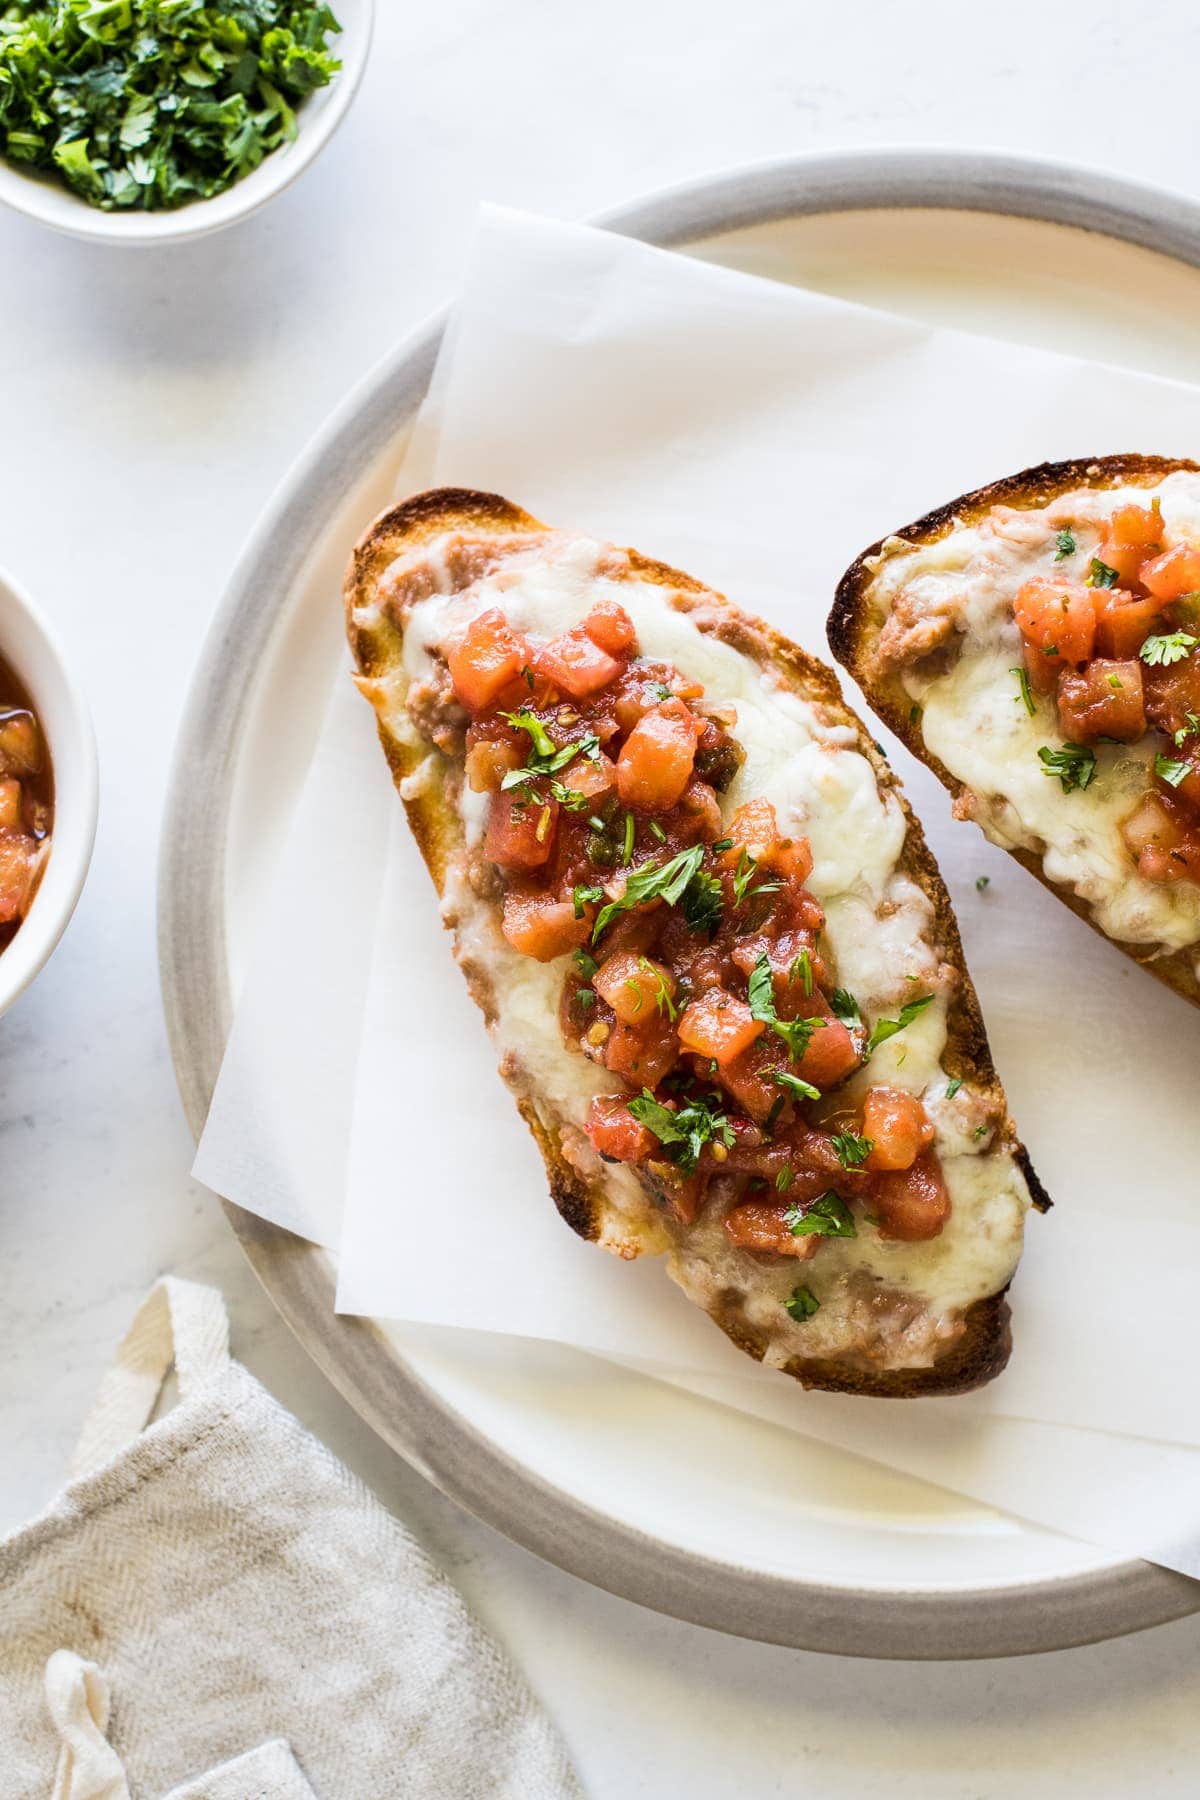 Molletes topped with refried beans, cheese and salsa.